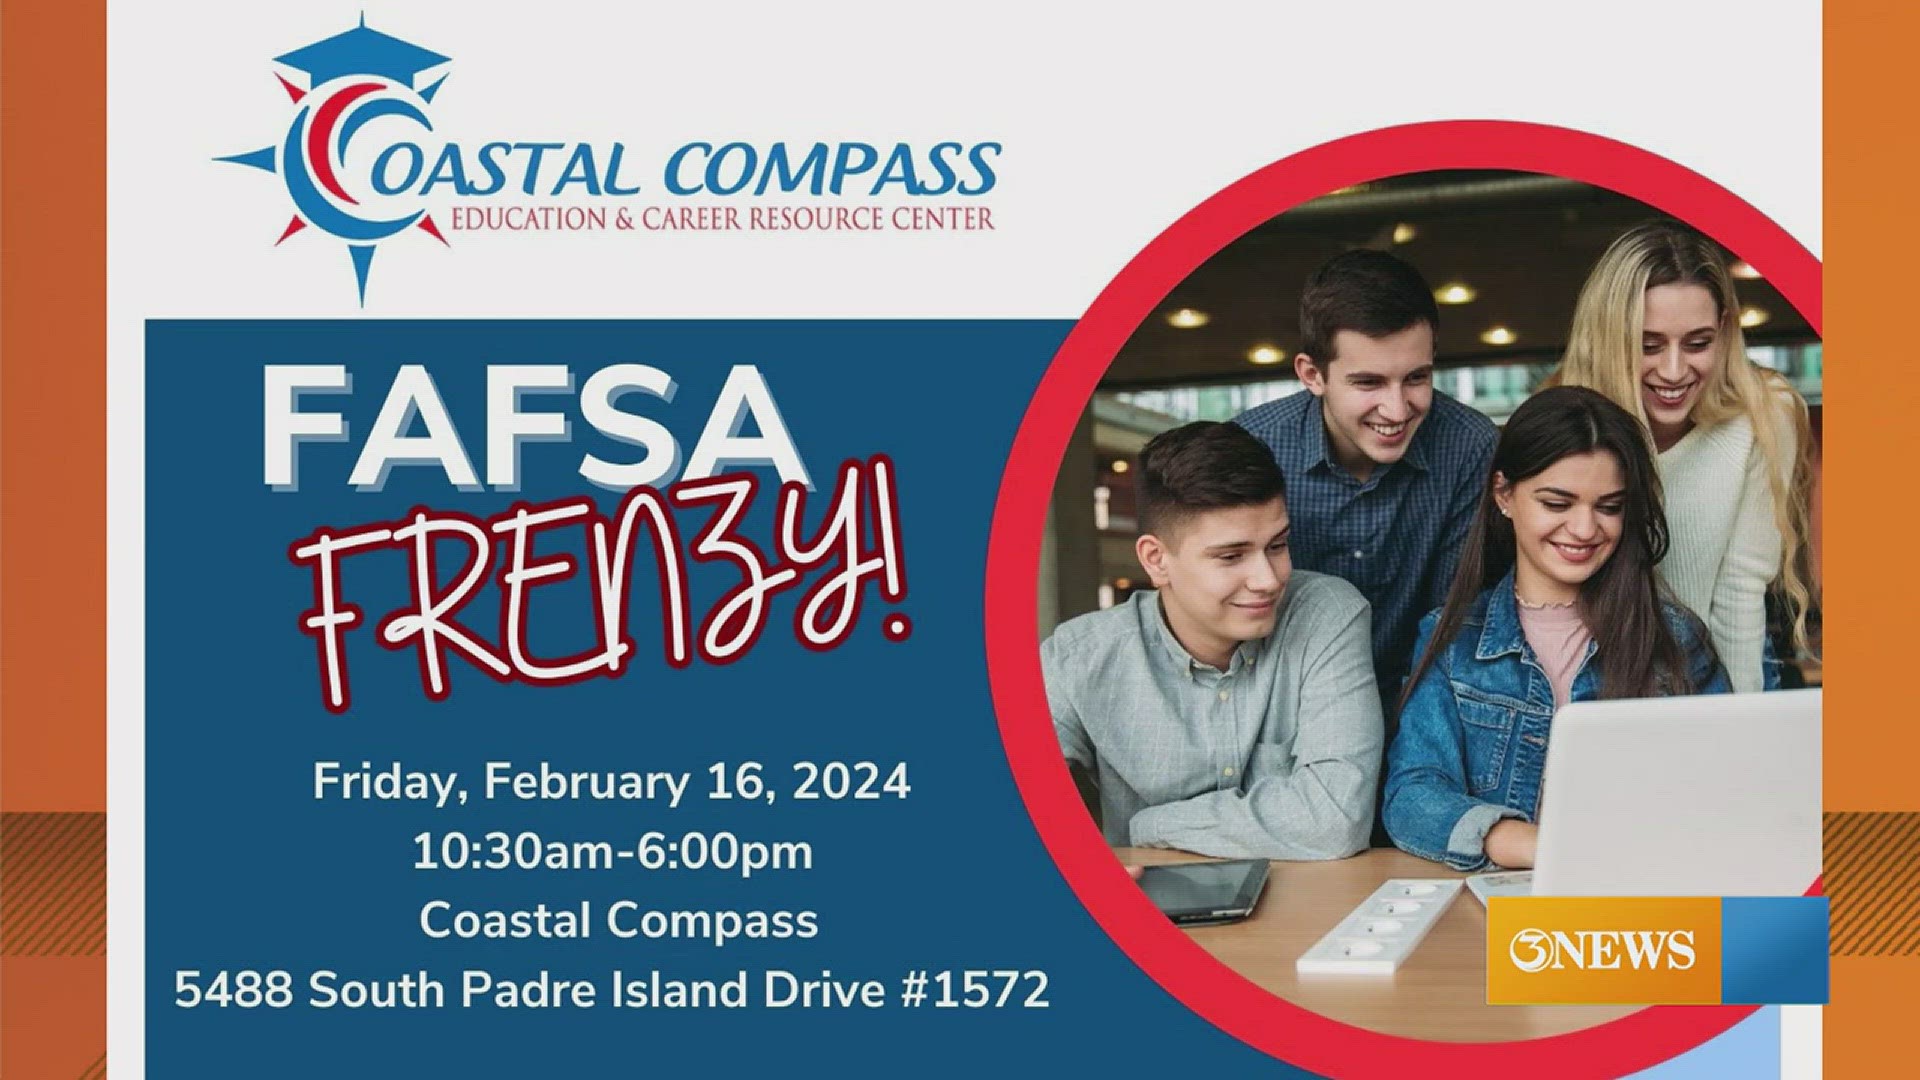 Do you have questions about how to fund your college education? With FAFSA changing over the years, Coastal Compass is here to help you navigate your application.